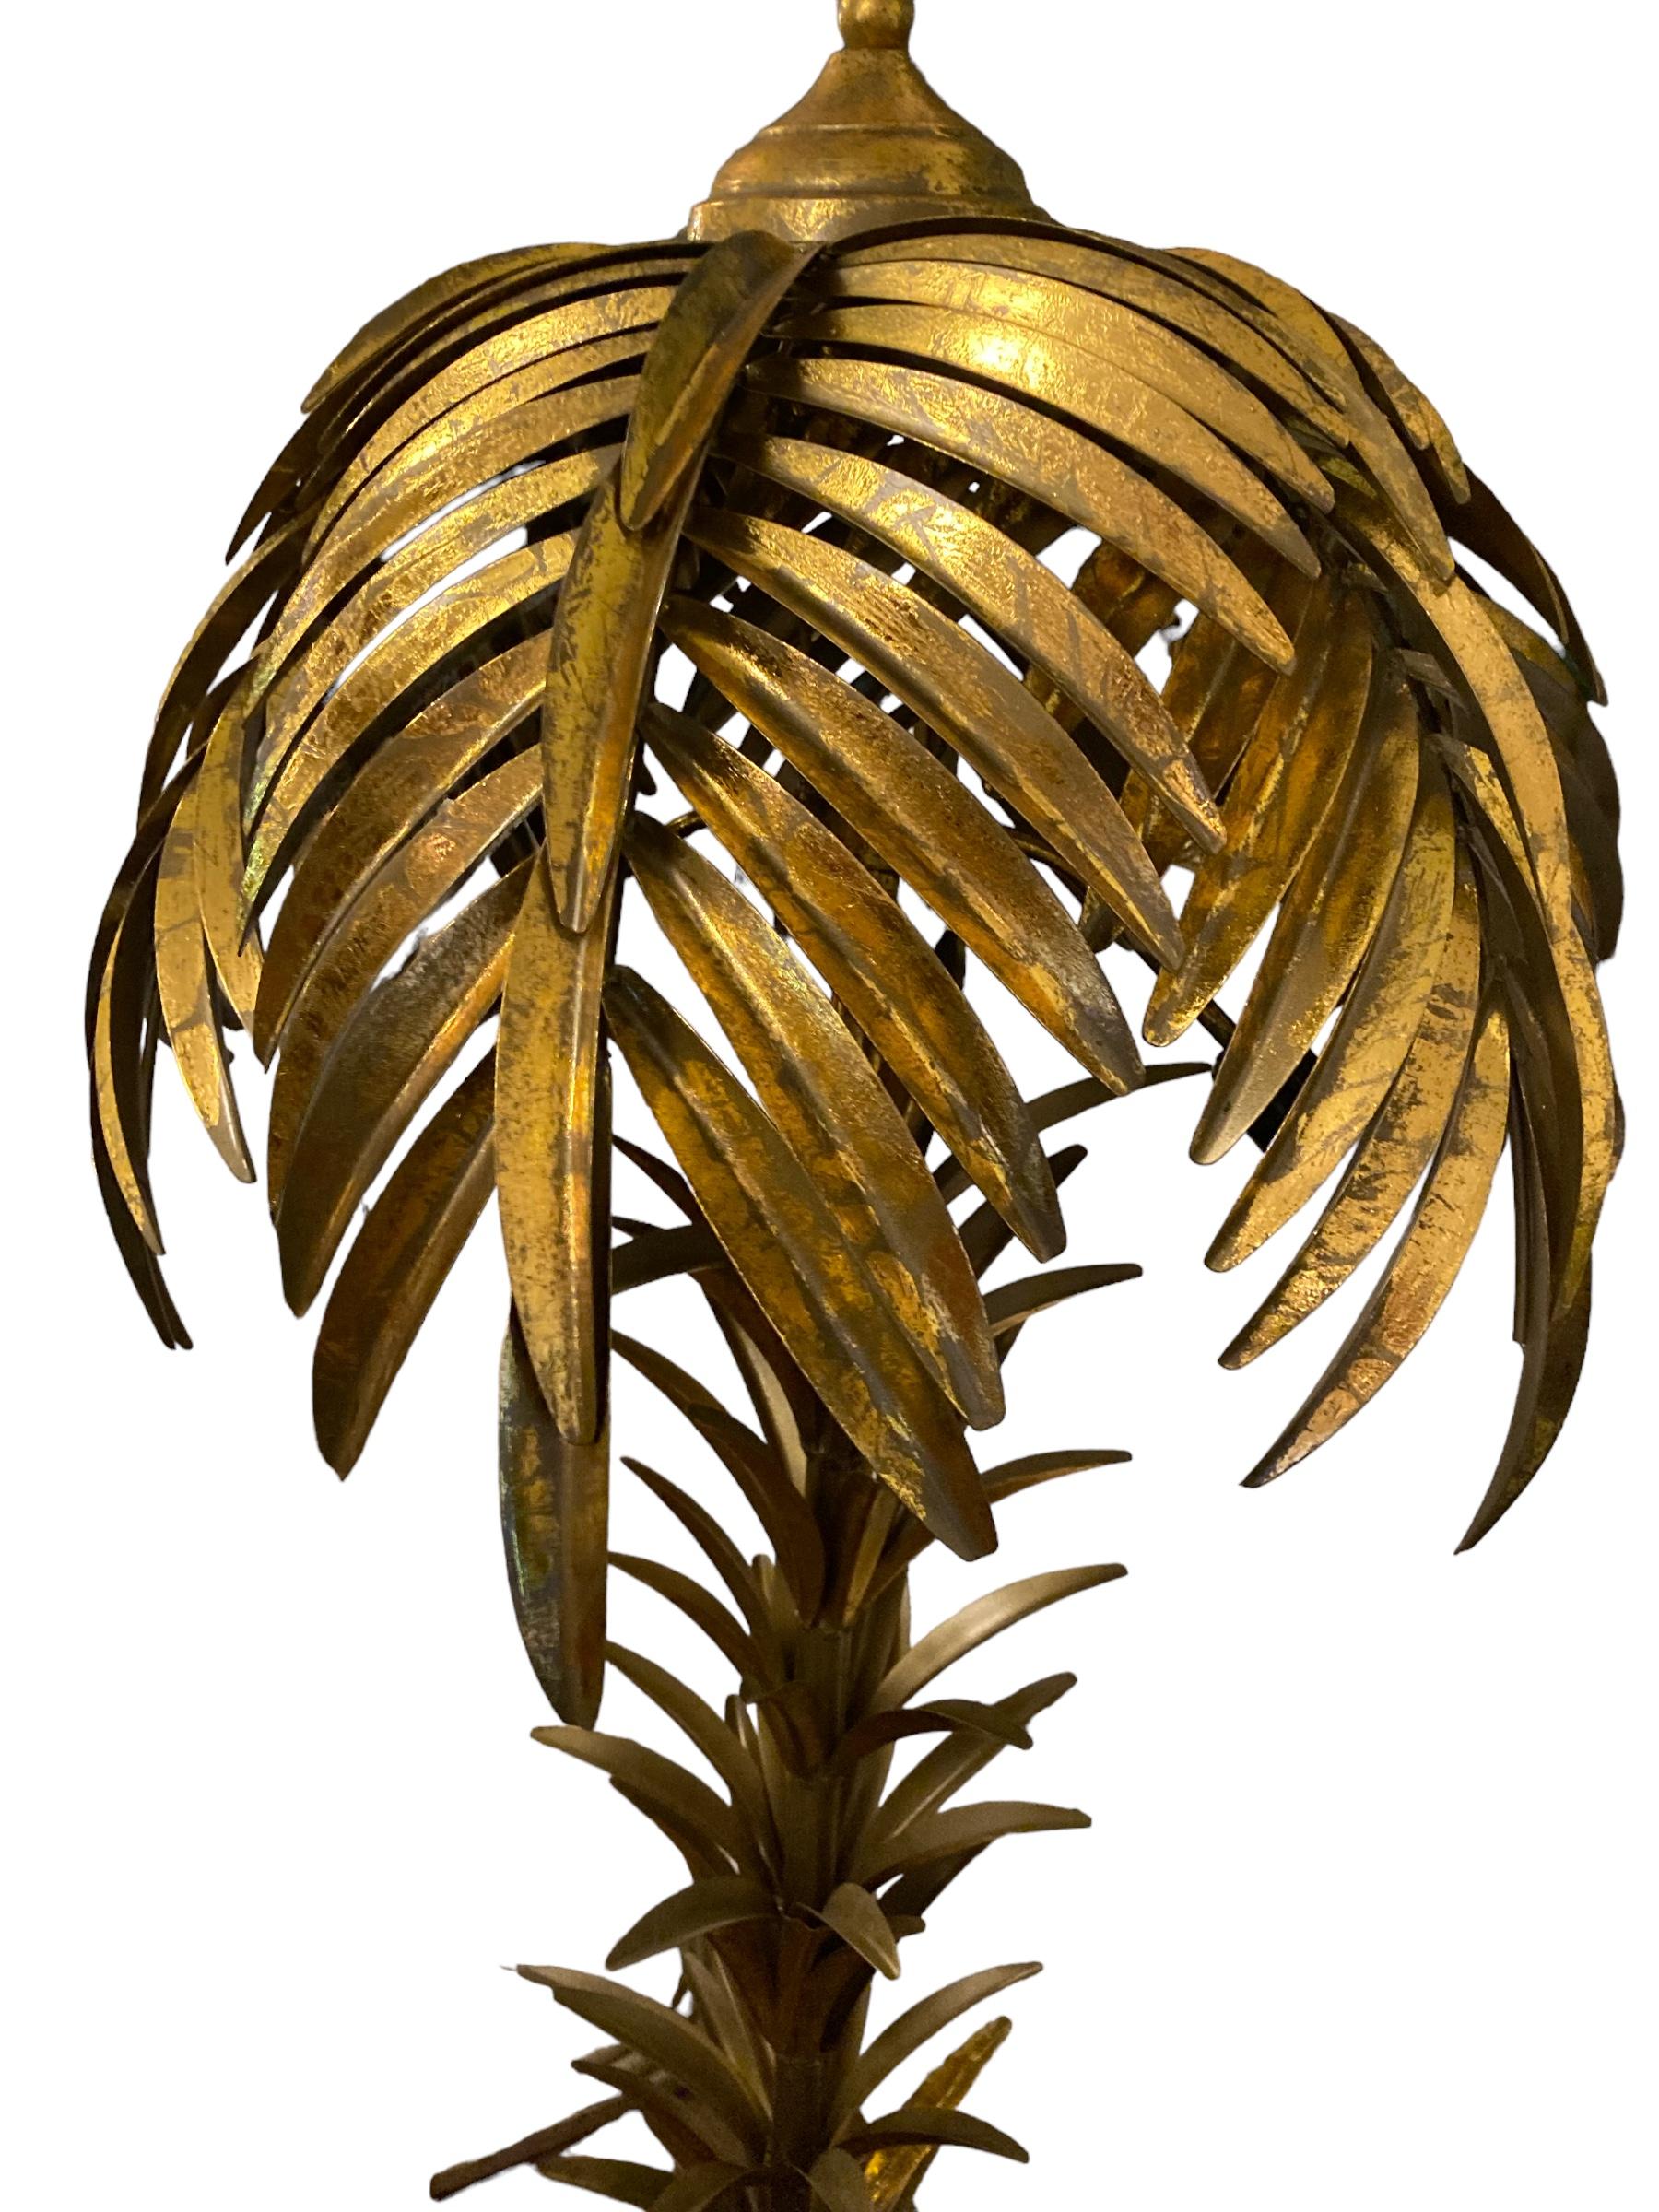 Hollywood Regency Style Gilt Metal Palm Tree Floor Lamp, Mid to late 20C 1